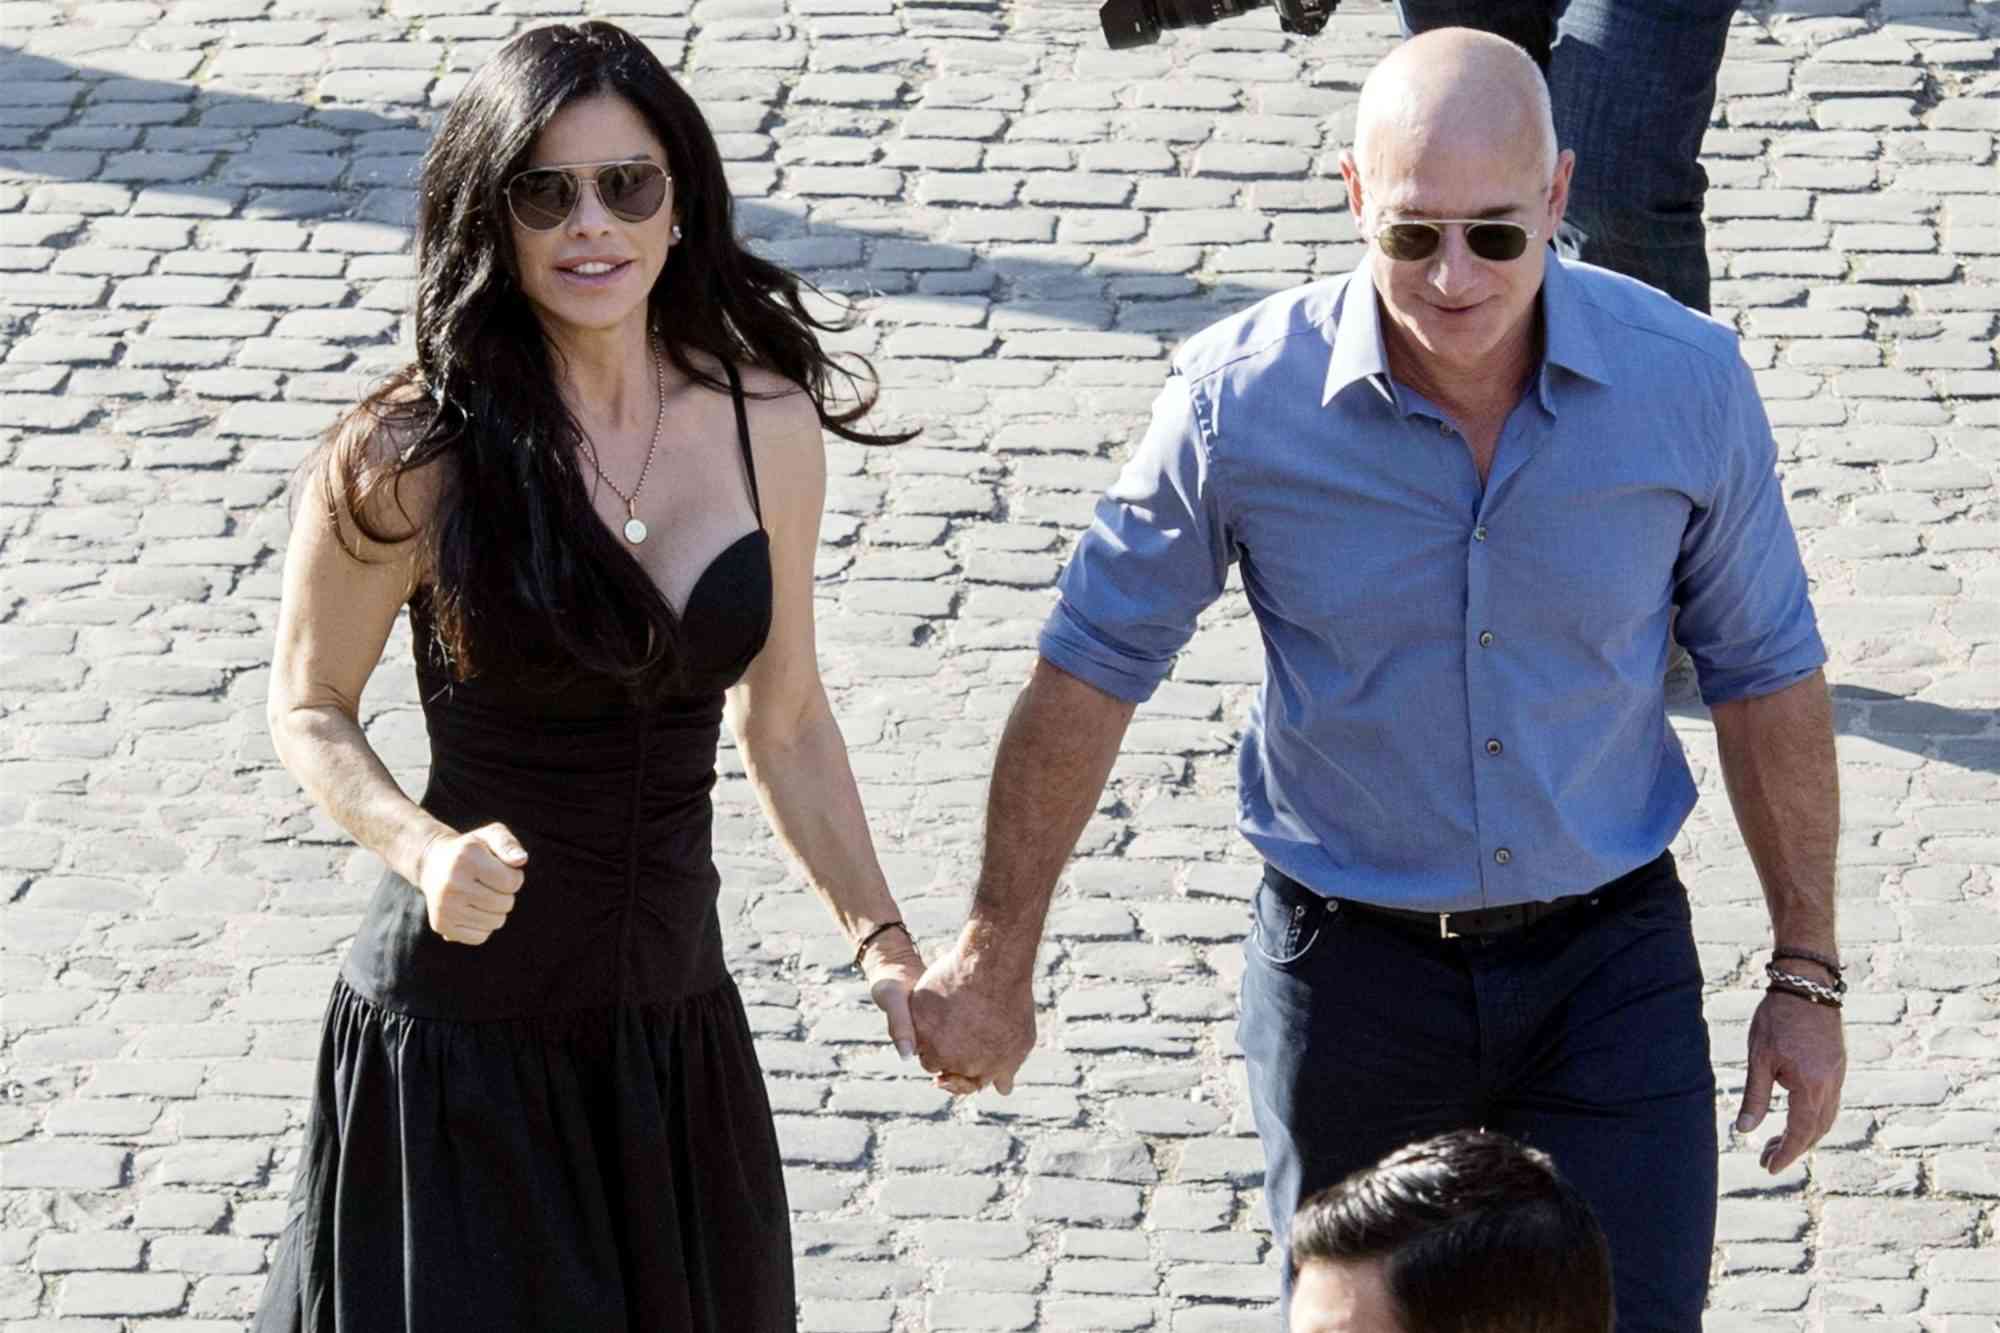 Rome, ITALY - American Billionaire Jeff Bezos and his partner Lauren Sanchez spend the day sightseeing as they enjoyed a trip to The Colosseum during their holiday in Rome, Italy. Pictured: Jeff Bezos, Lauren Sanchez BACKGRID USA 15 OCTOBER 2022 BYLINE MUST READ: Cobra Team / BACKGRID USA: +1 310 798 9111 / usasales@backgrid.com UK: +44 208 344 2007 / uksales@backgrid.com *UK Clients - Pictures Containing Children Please Pixelate Face Prior To Publication*